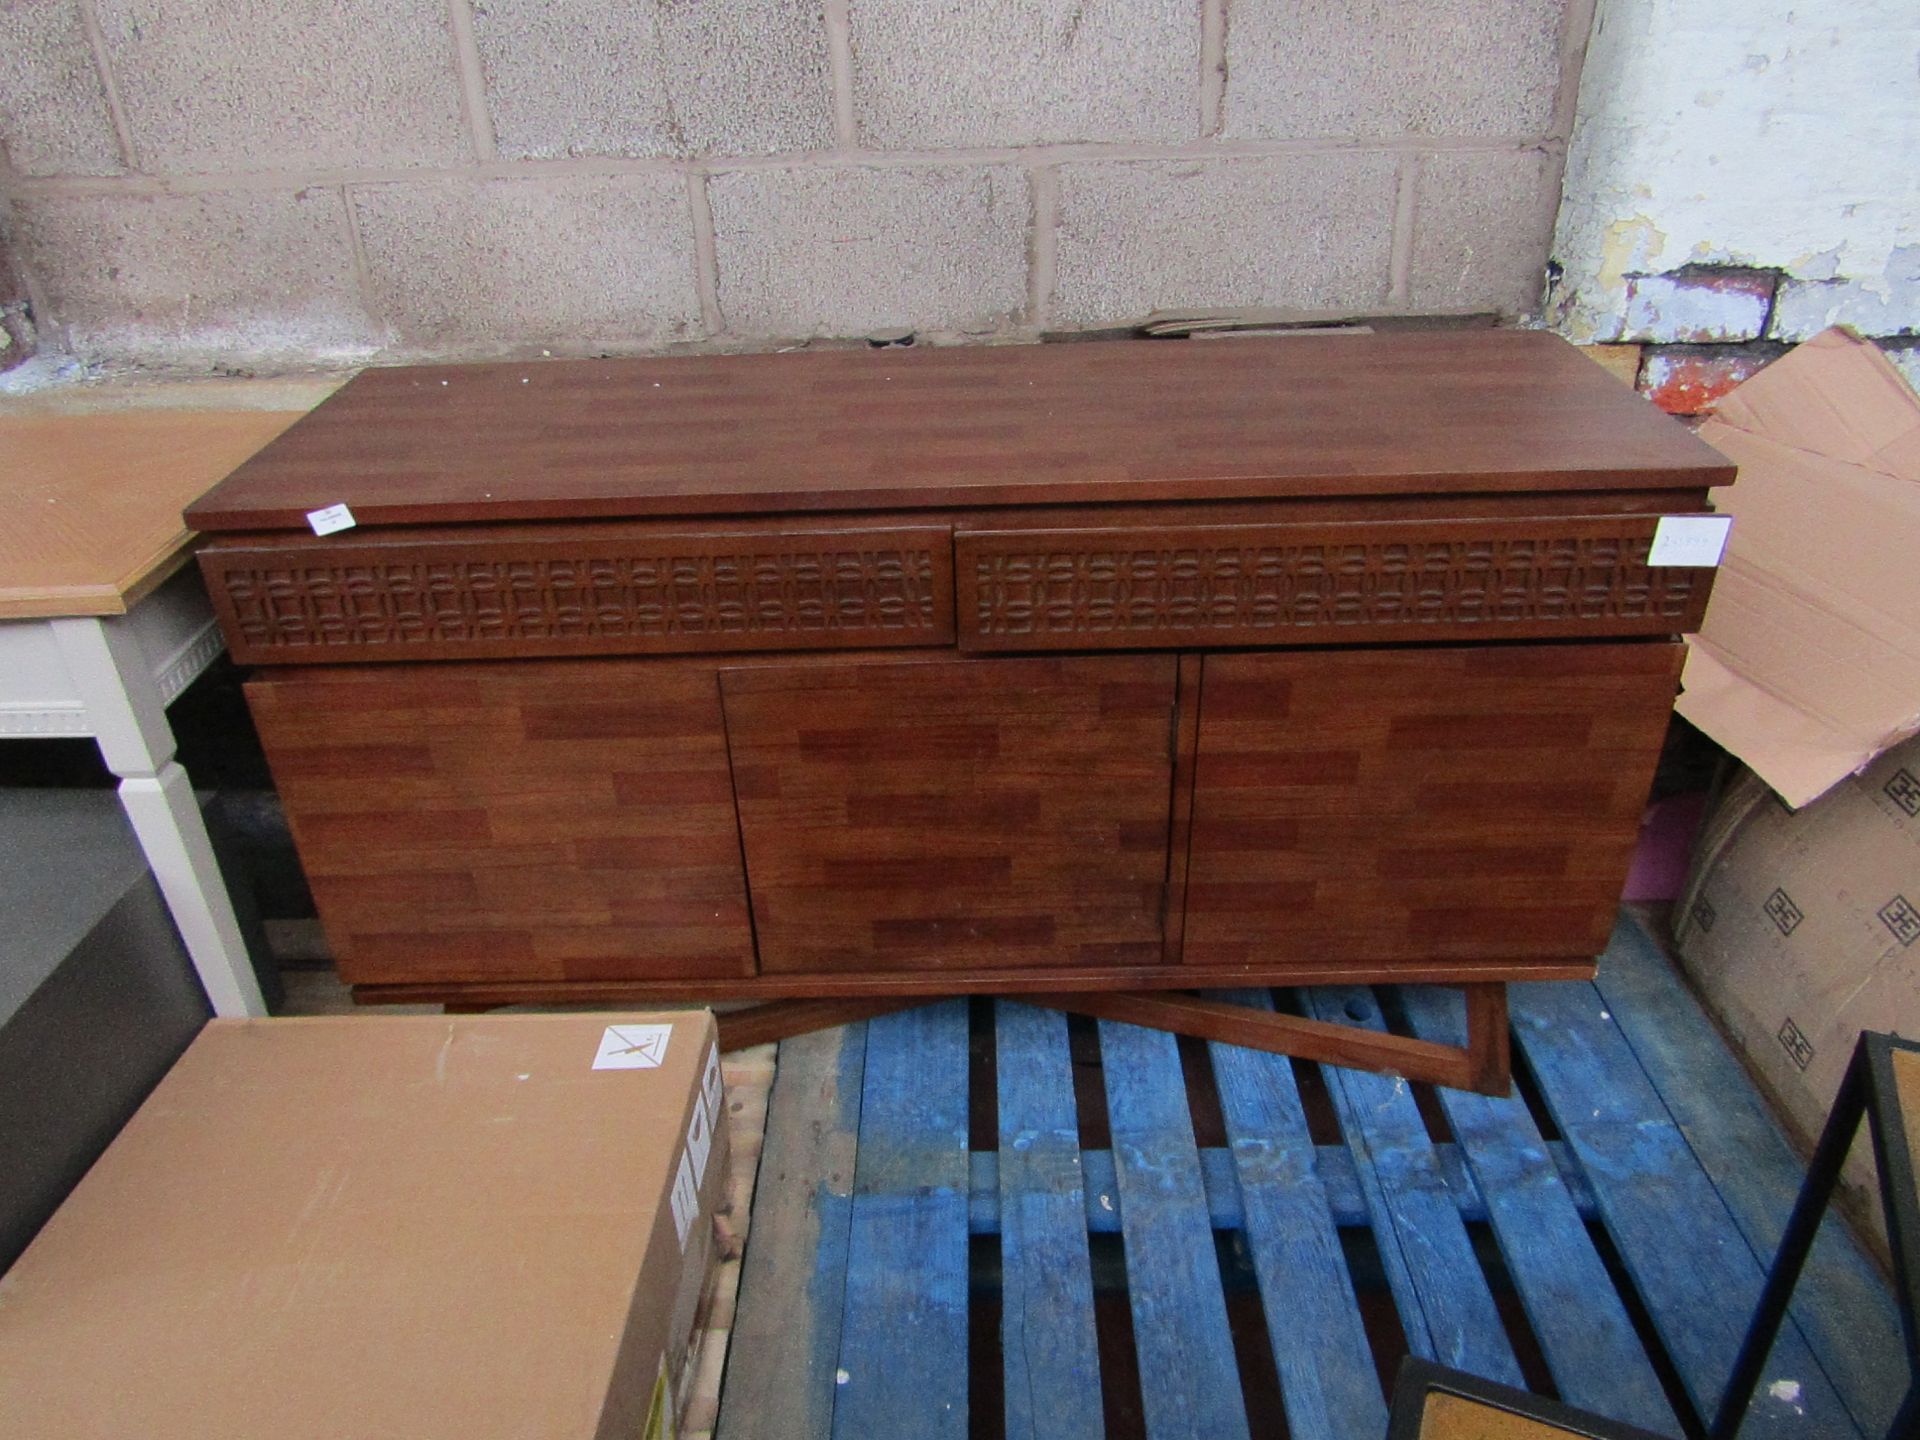 | 1X | MOOT SIDEBOARD | STAINED WOOD | LOOKS TO BE OKAY, MAY BE SOME IMPERFECTIONS, VIEWING